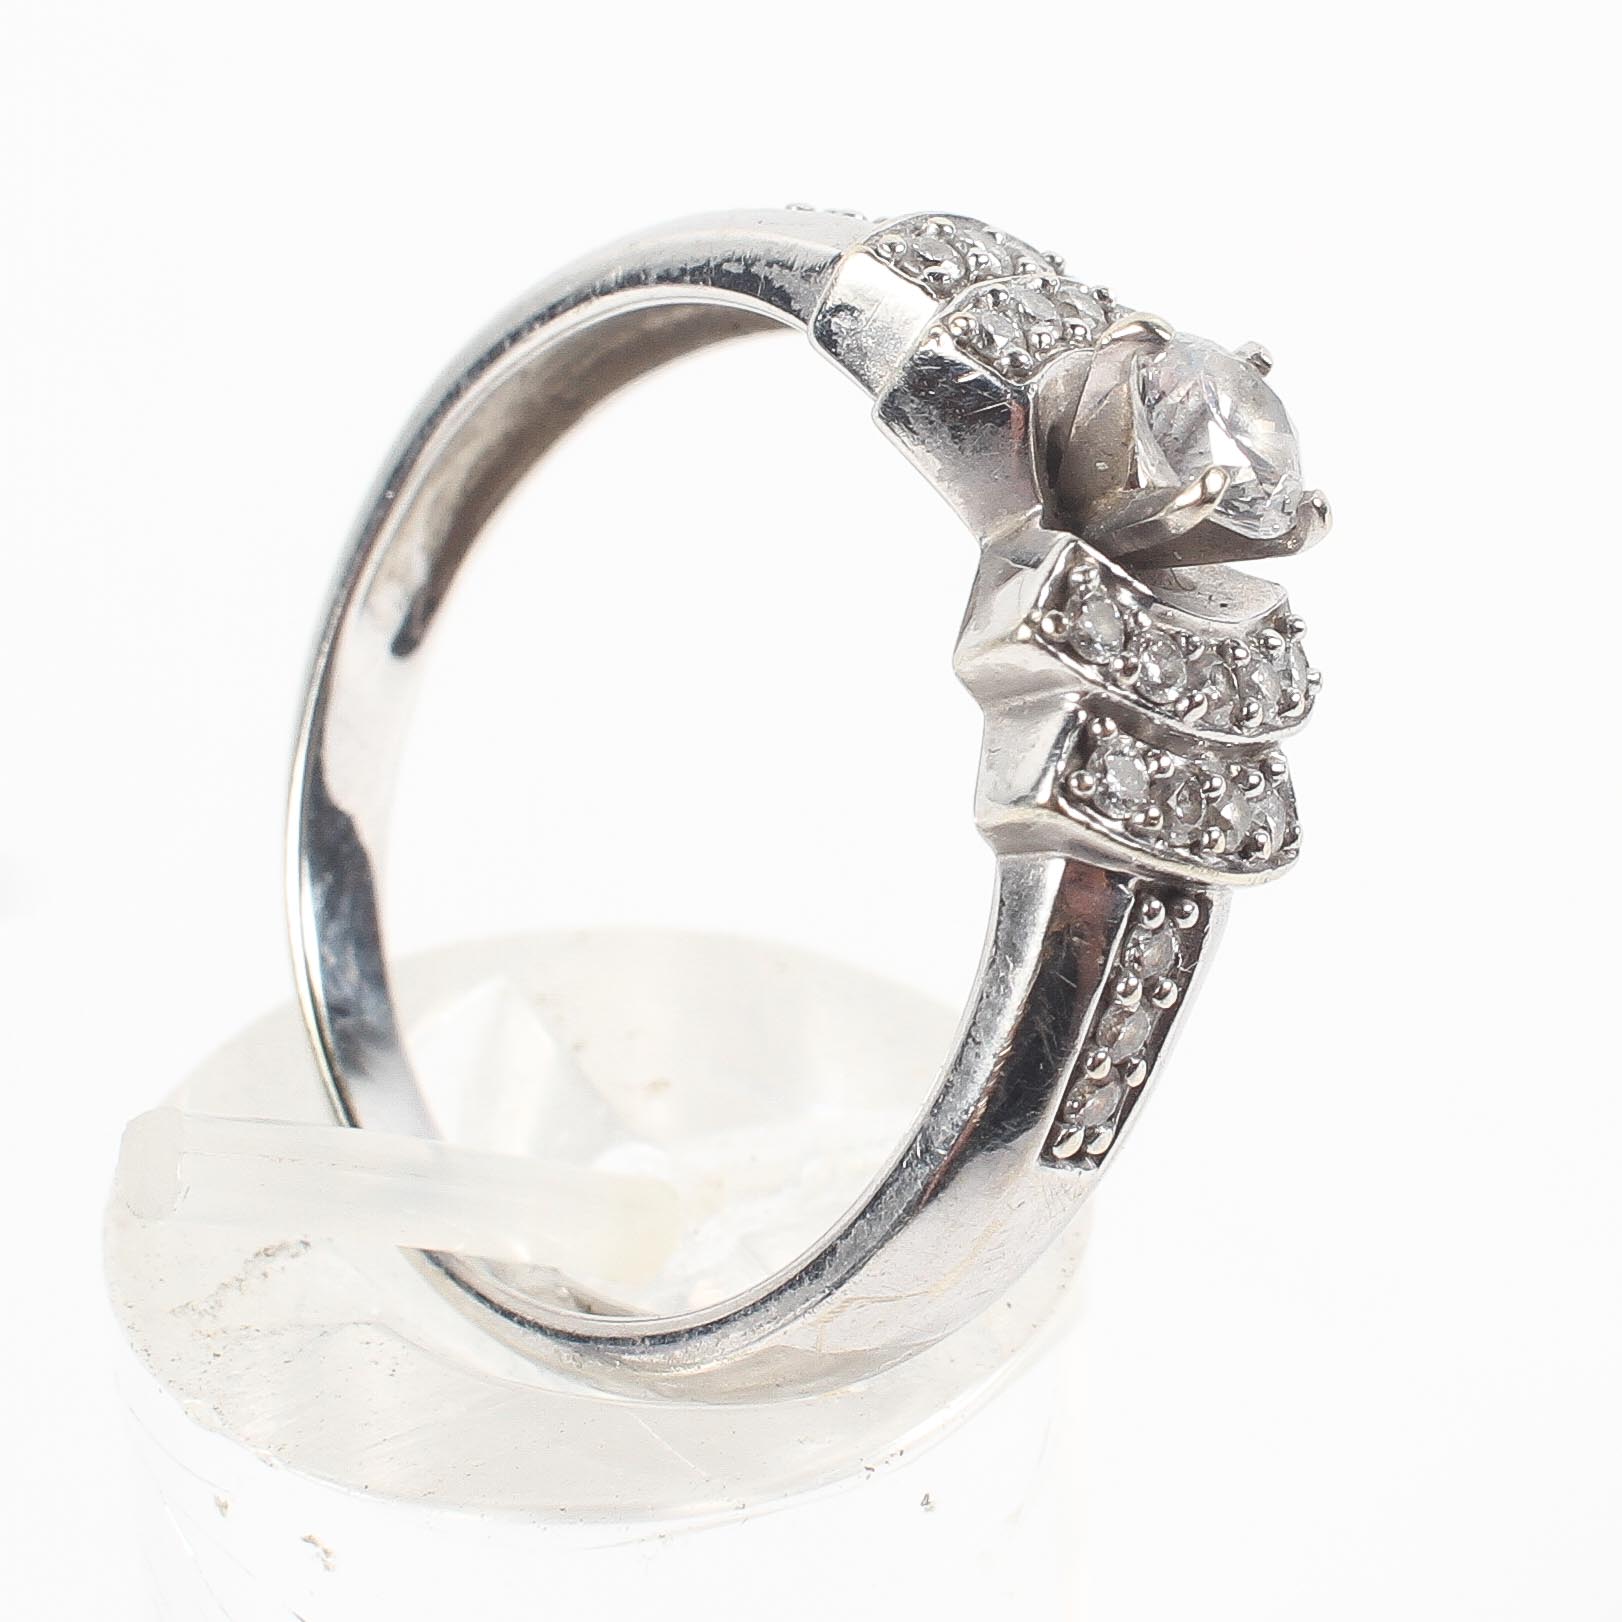 A white metal ring principally set with a round brilliant cut diamond estimated to weigh 0.25cts.